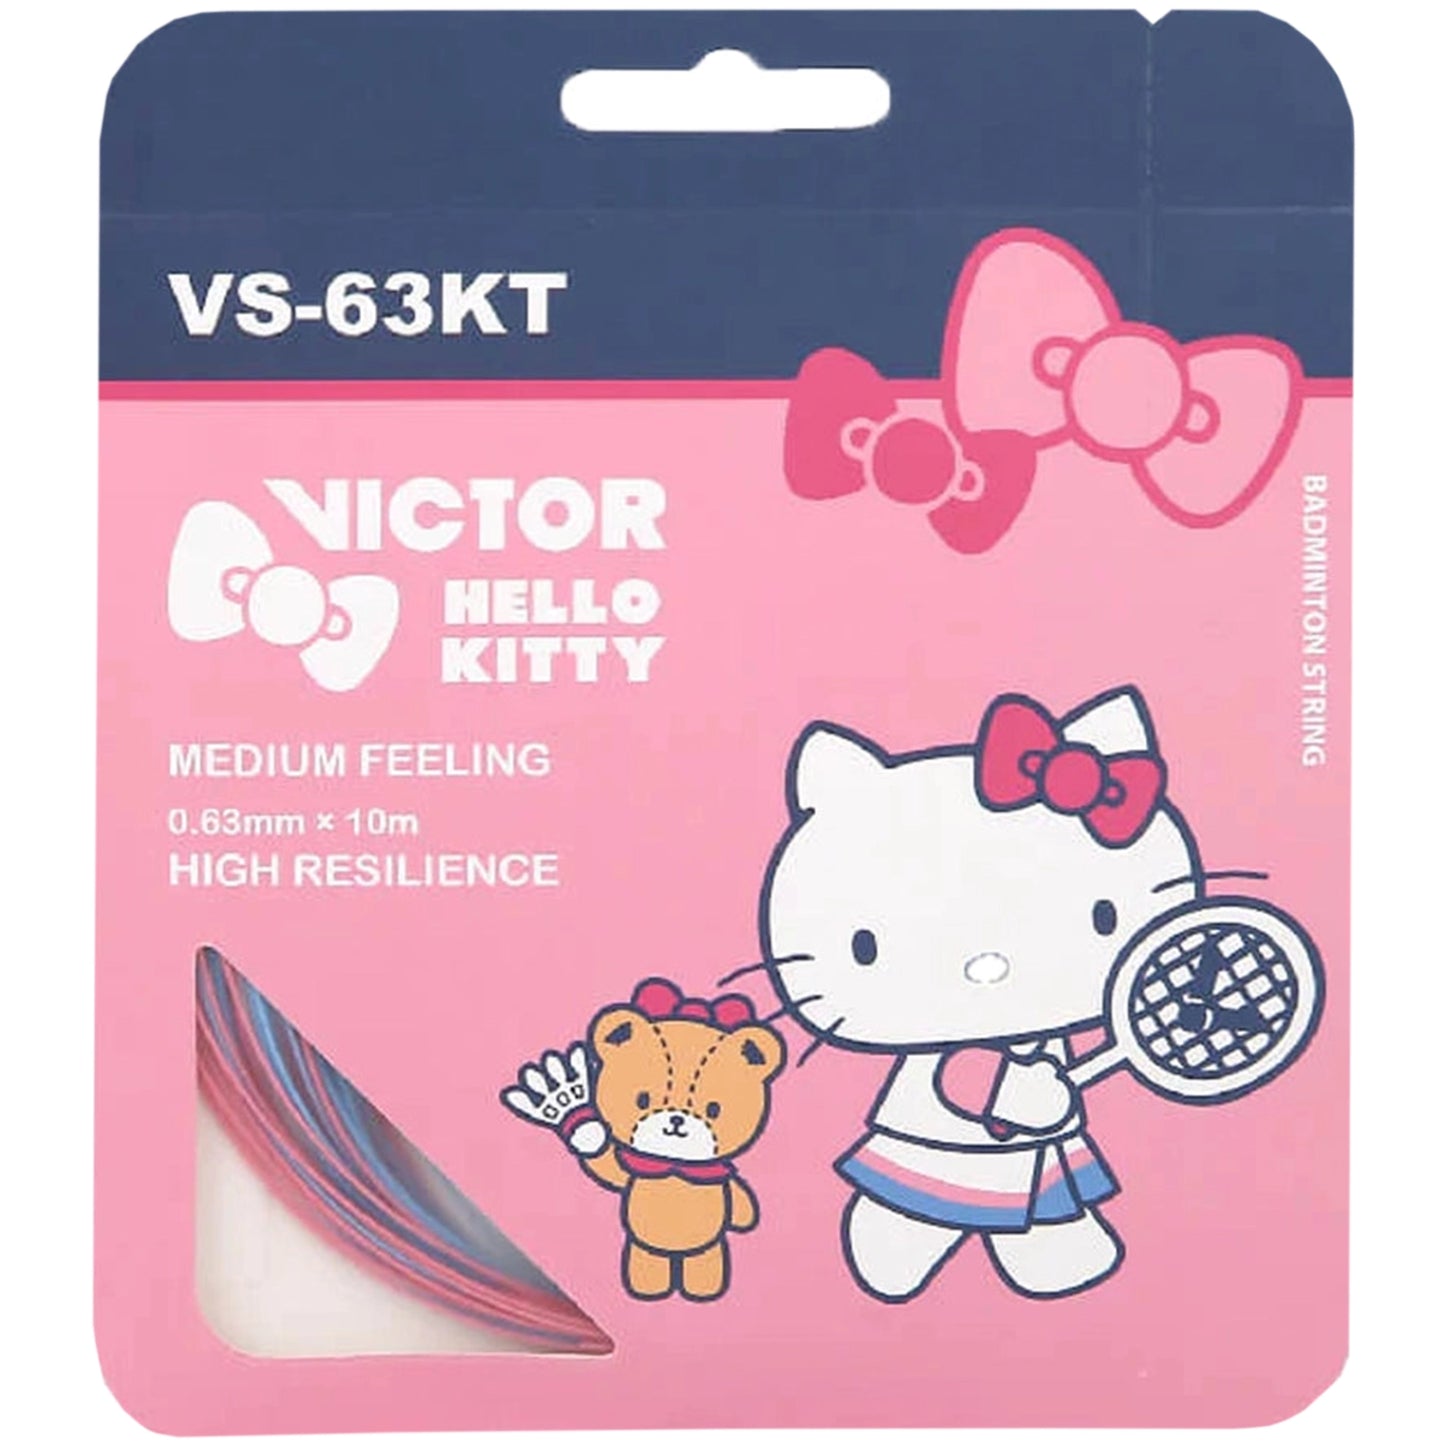 Victor VS-63KT Hello Kitty 10m Pink/Blue